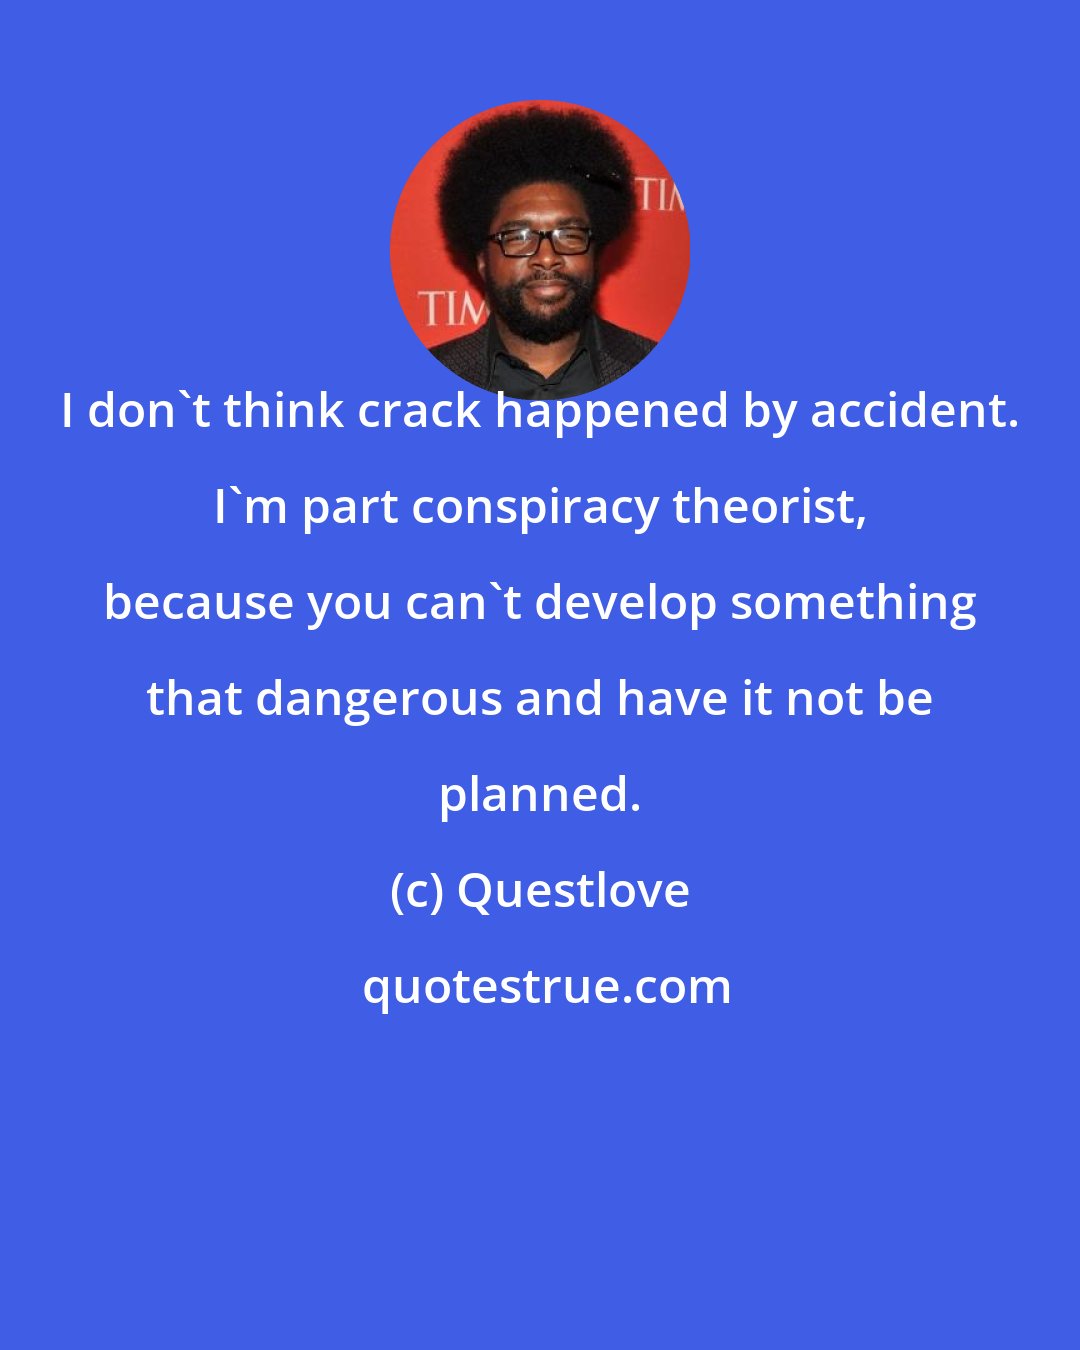 Questlove: I don't think crack happened by accident. I'm part conspiracy theorist, because you can't develop something that dangerous and have it not be planned.